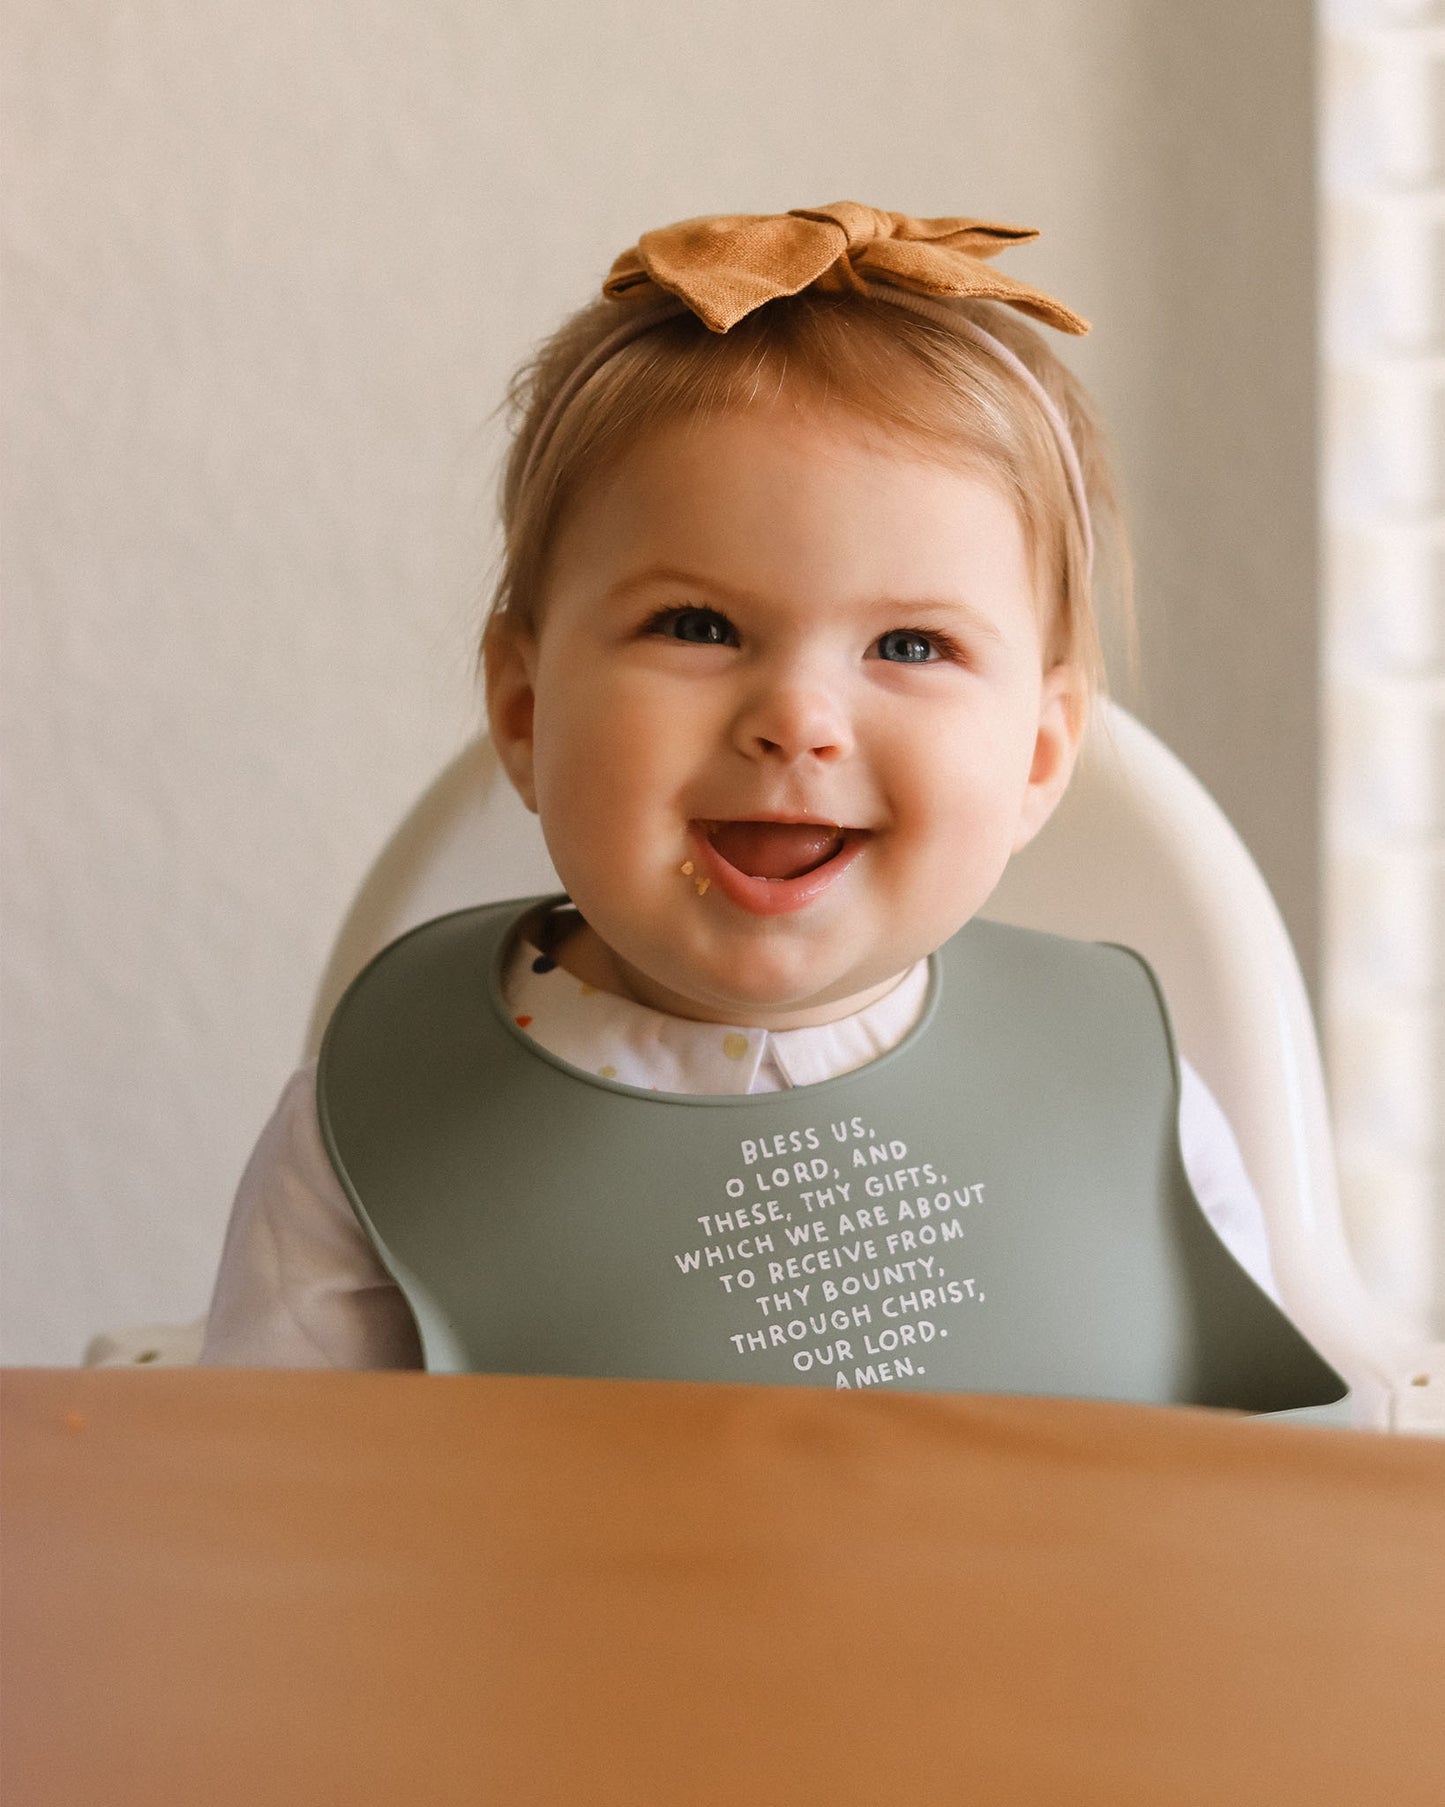 Meal Blessing Silicone Bib